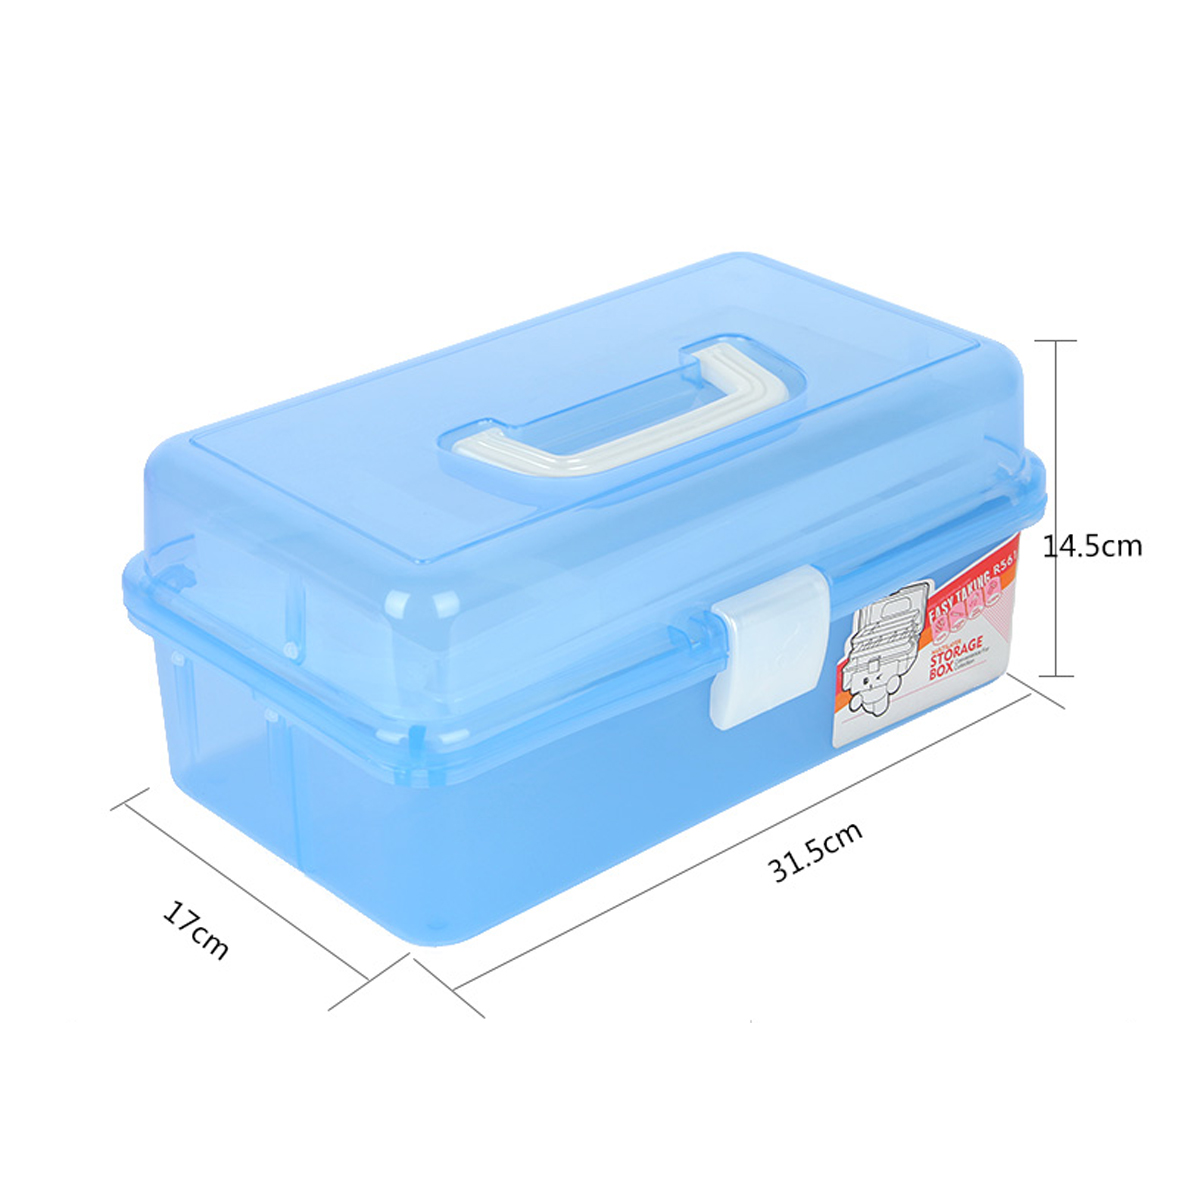 Clear-Plastic-Craft-Makeup-Organizer-Jewelry-Storage-Compartment-Tools-Box-Case-1263882-5